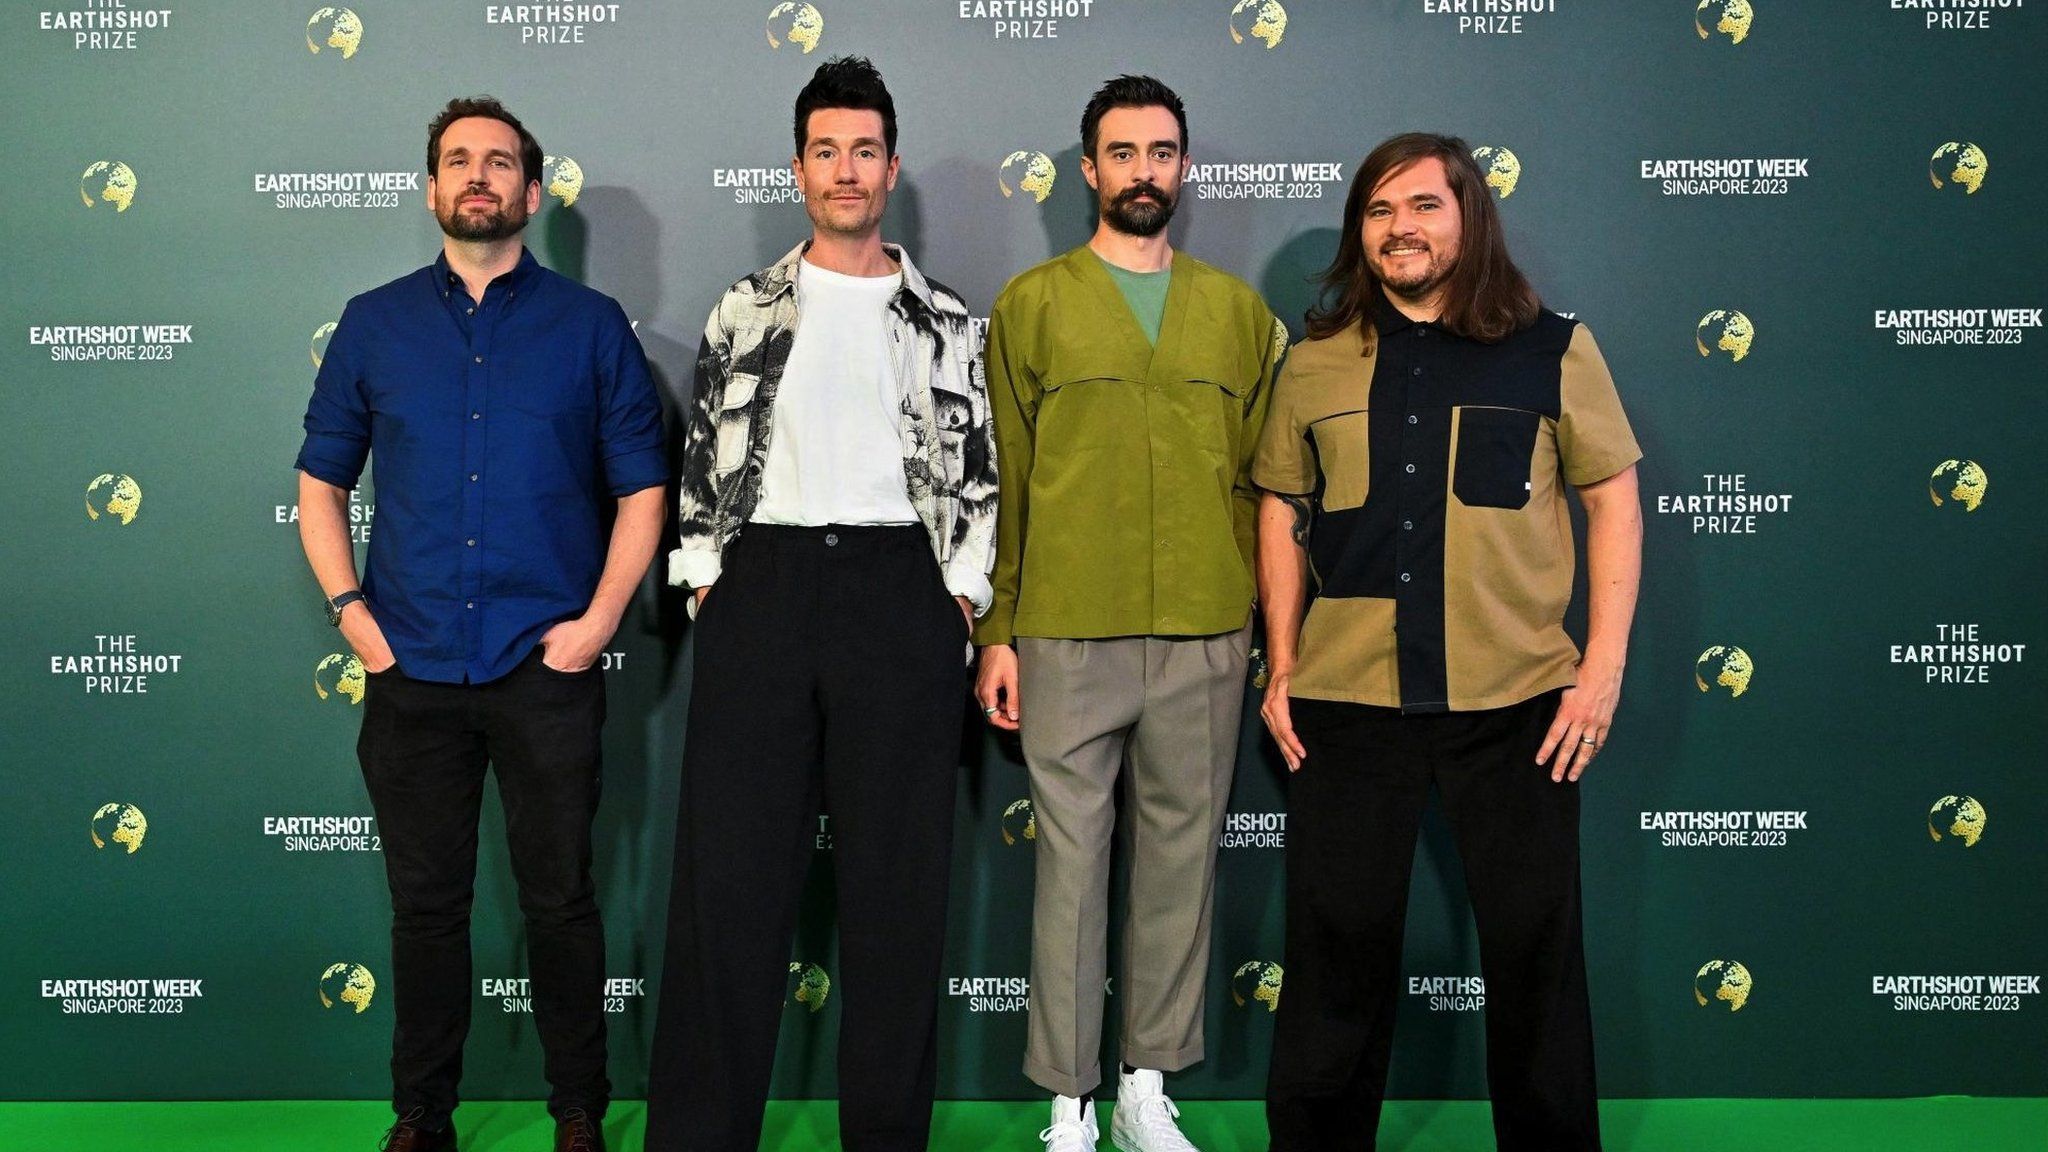 Members of indie pop band Bastille pose on the green carpet